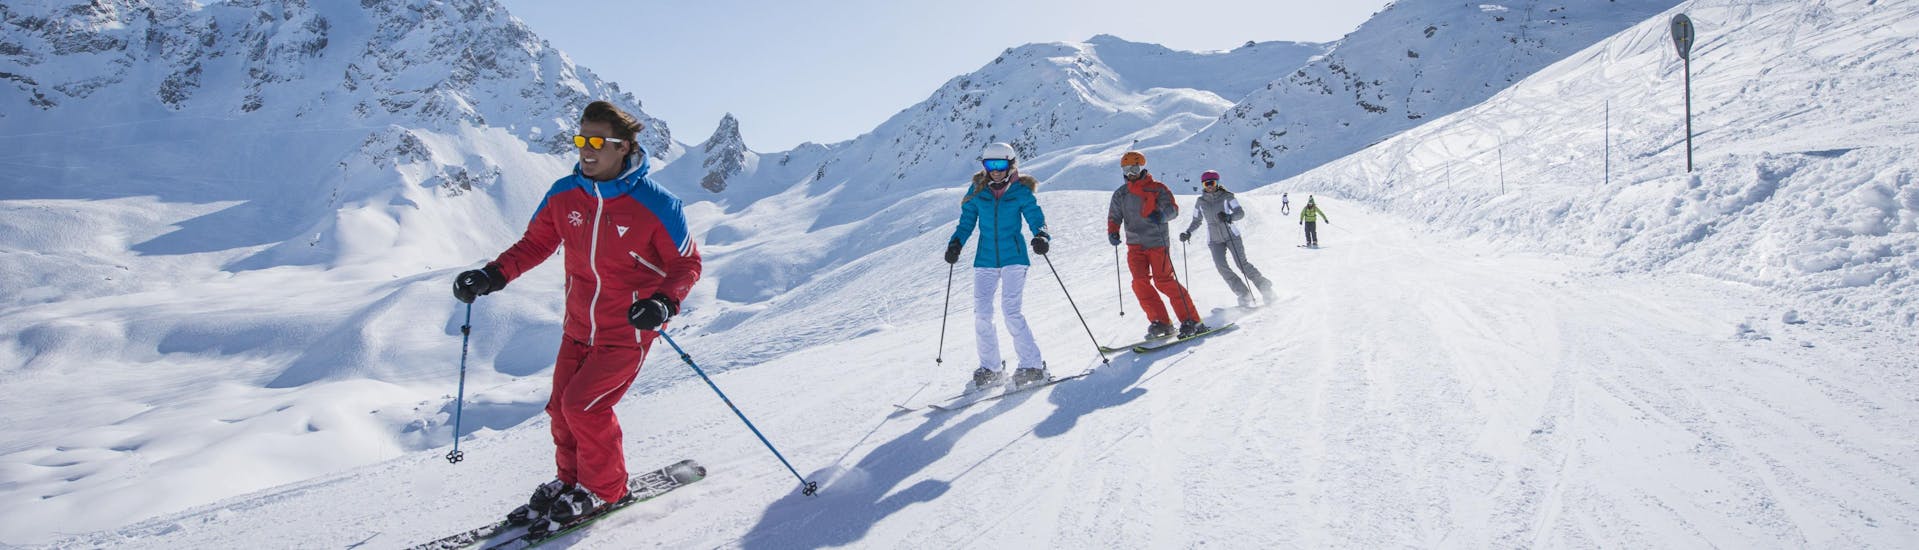 A group of skiers enjoy a day out in the slopes of the Courchevel 1550 ski resort in France where ski schools offers their ski lessons.